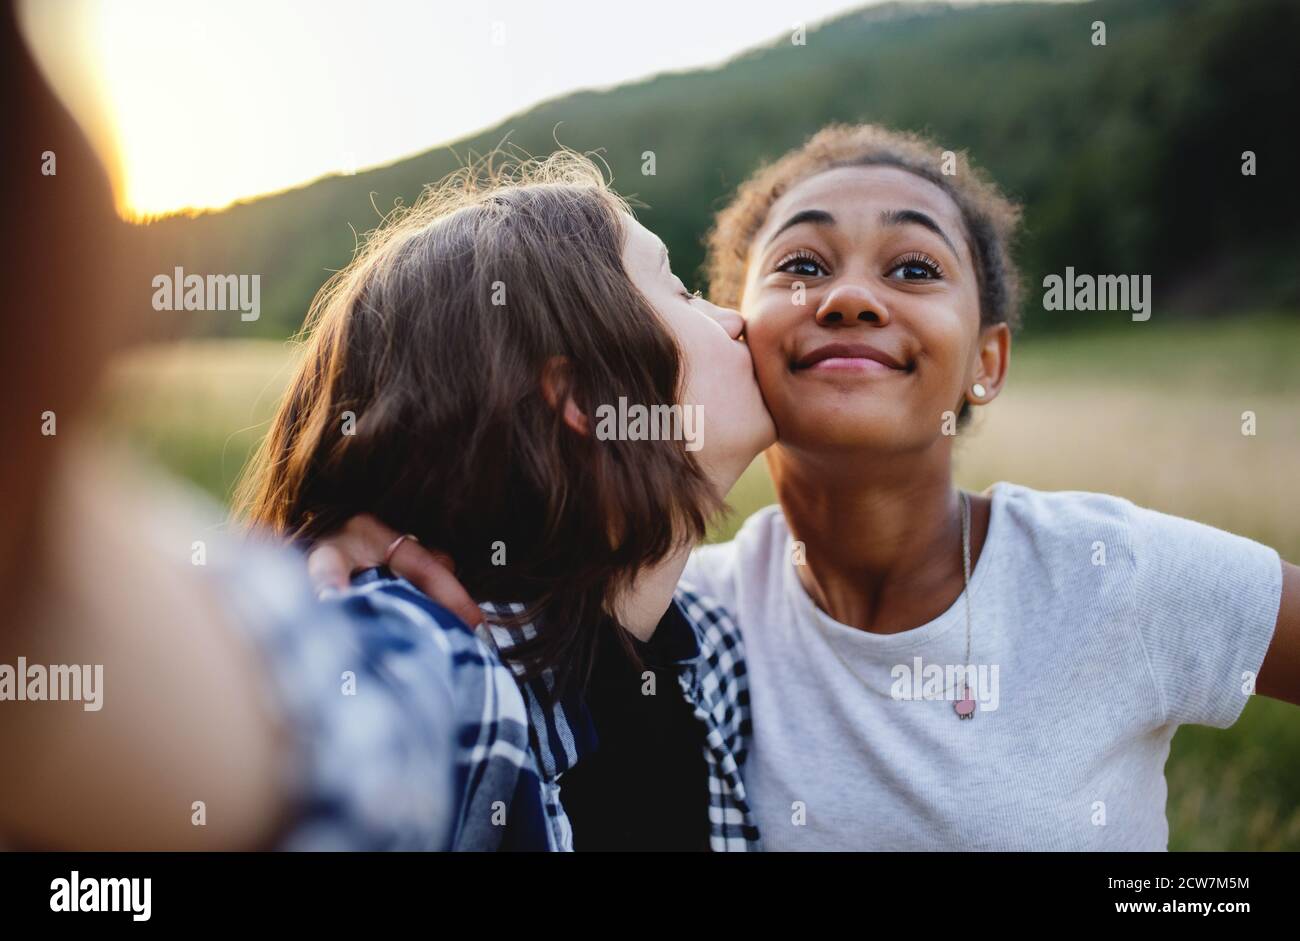 Front view of young teenager girls friends kissing outdoors in nature, taking selfie. Stock Photo